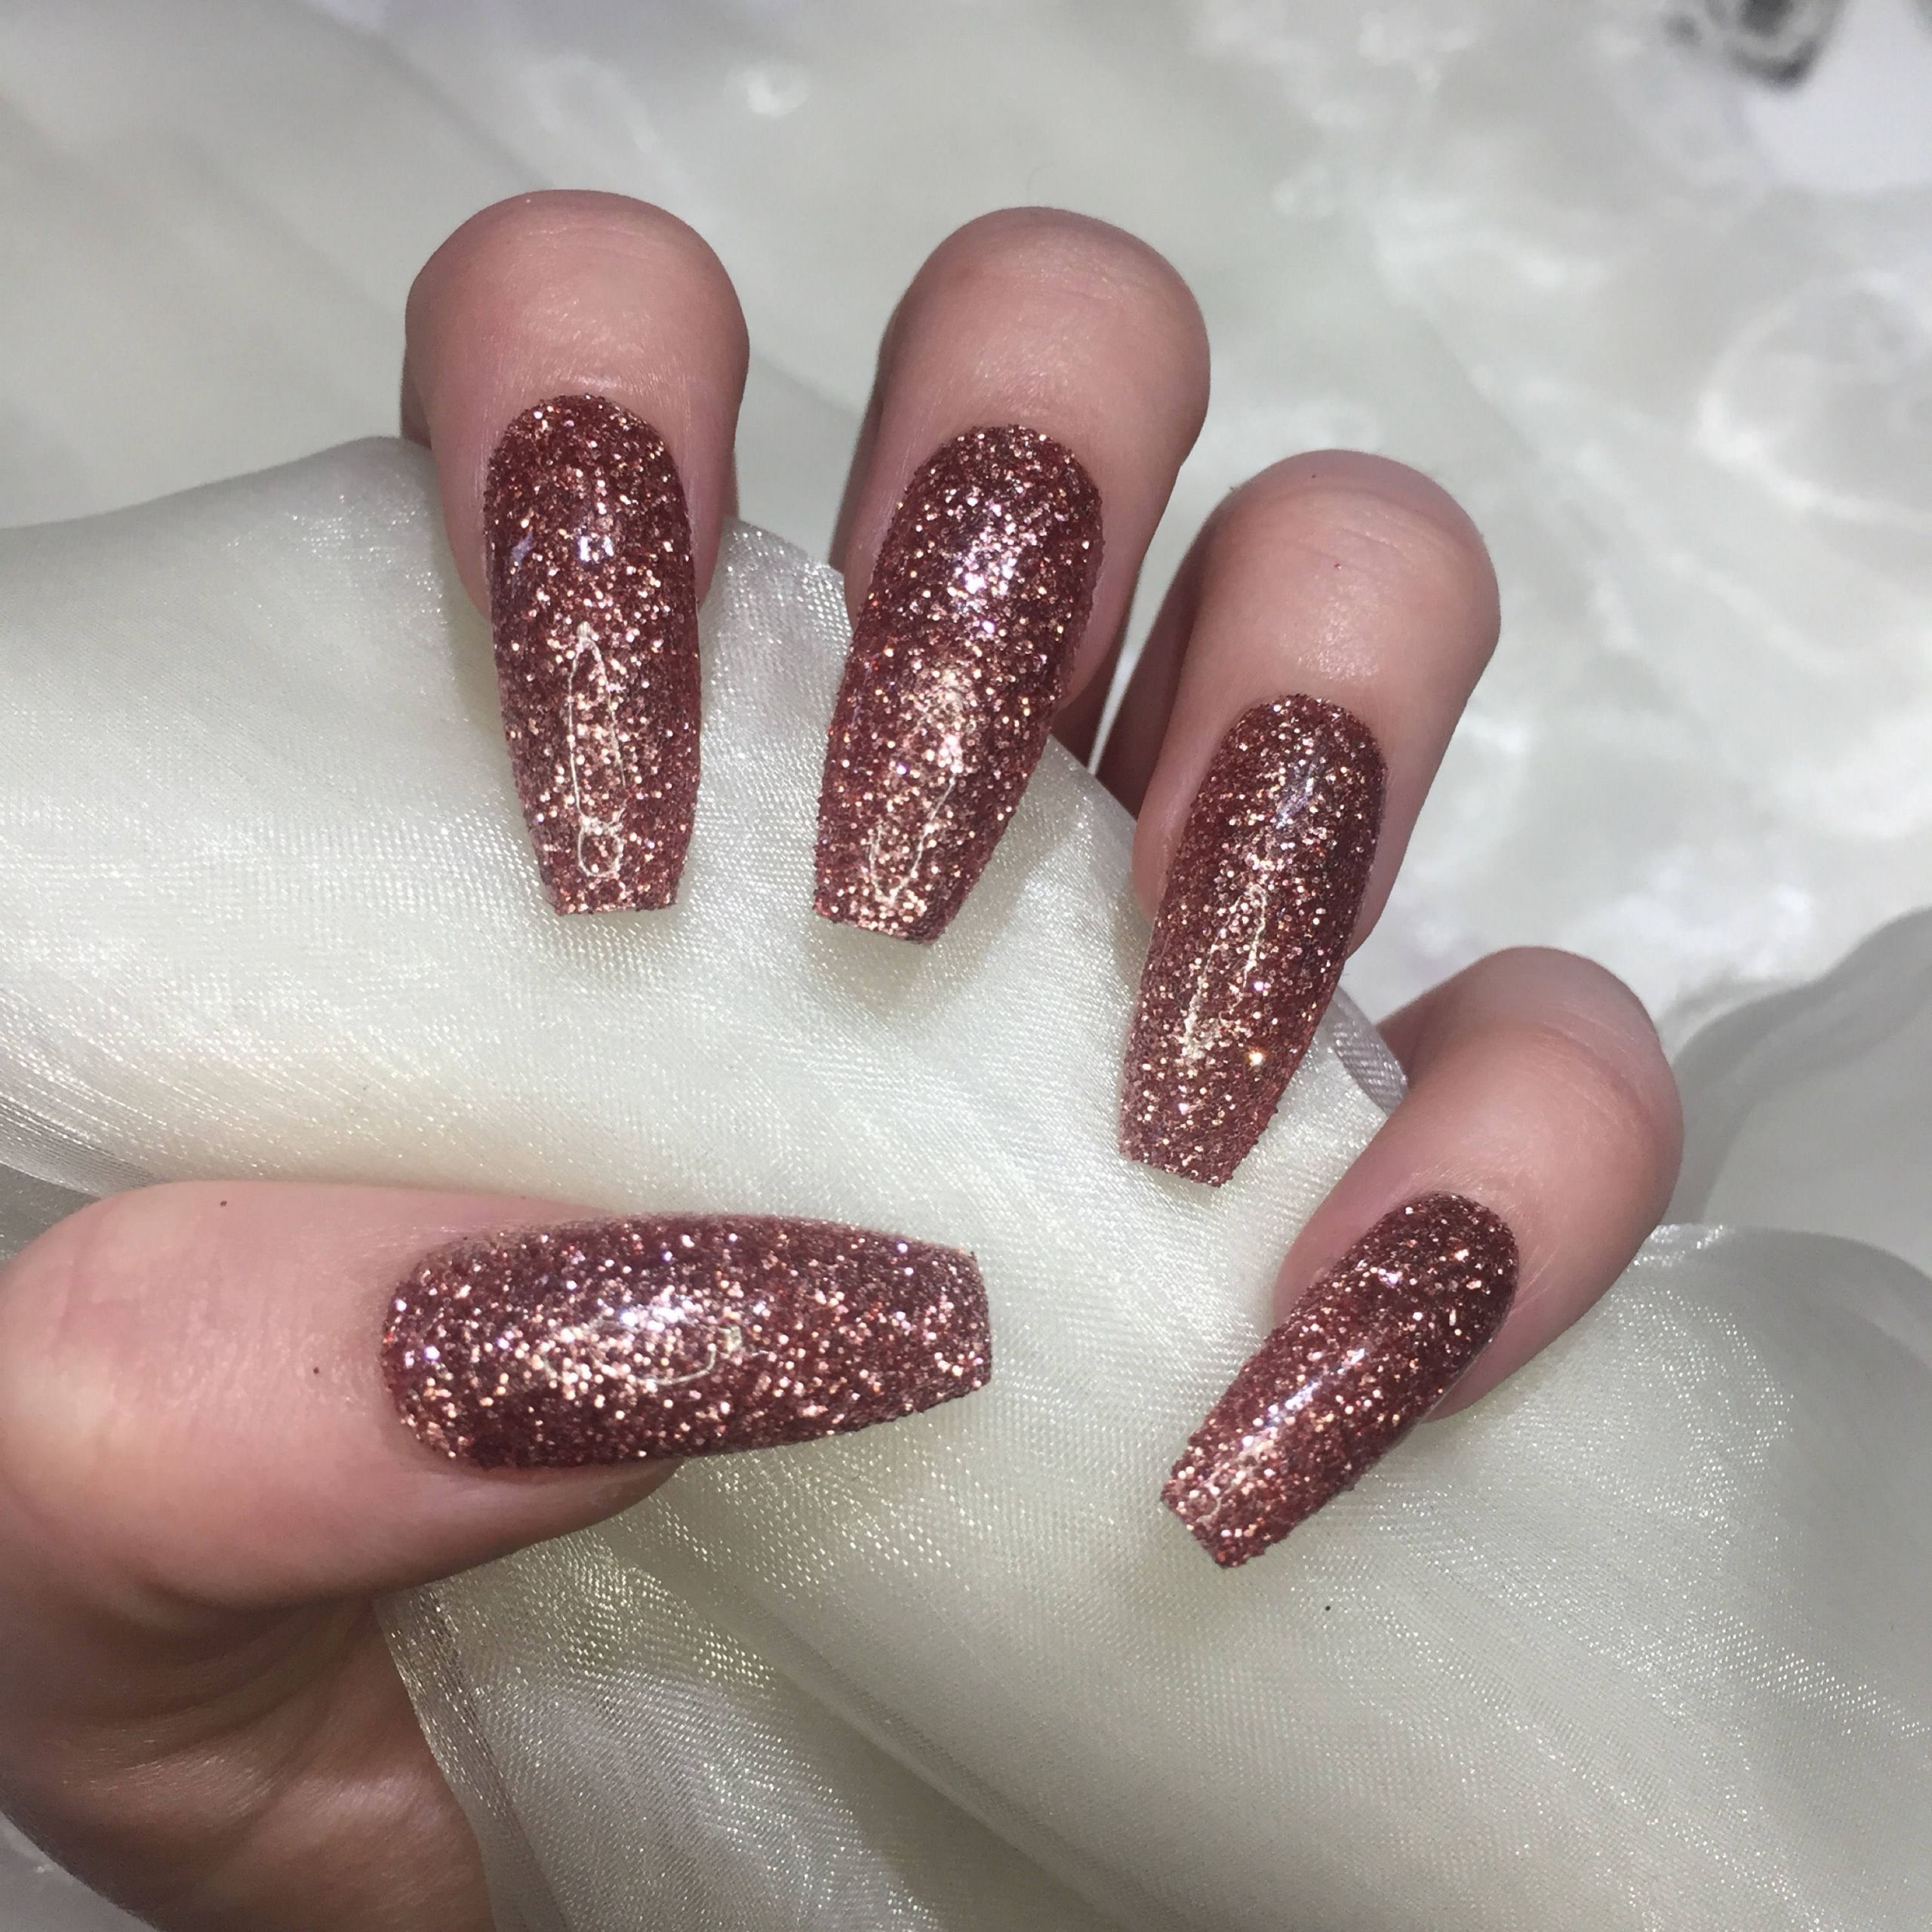 Gold Glitter Acrylic Nails
 Extra Long Coffin Rose Gold Glitter Coffin False Nails